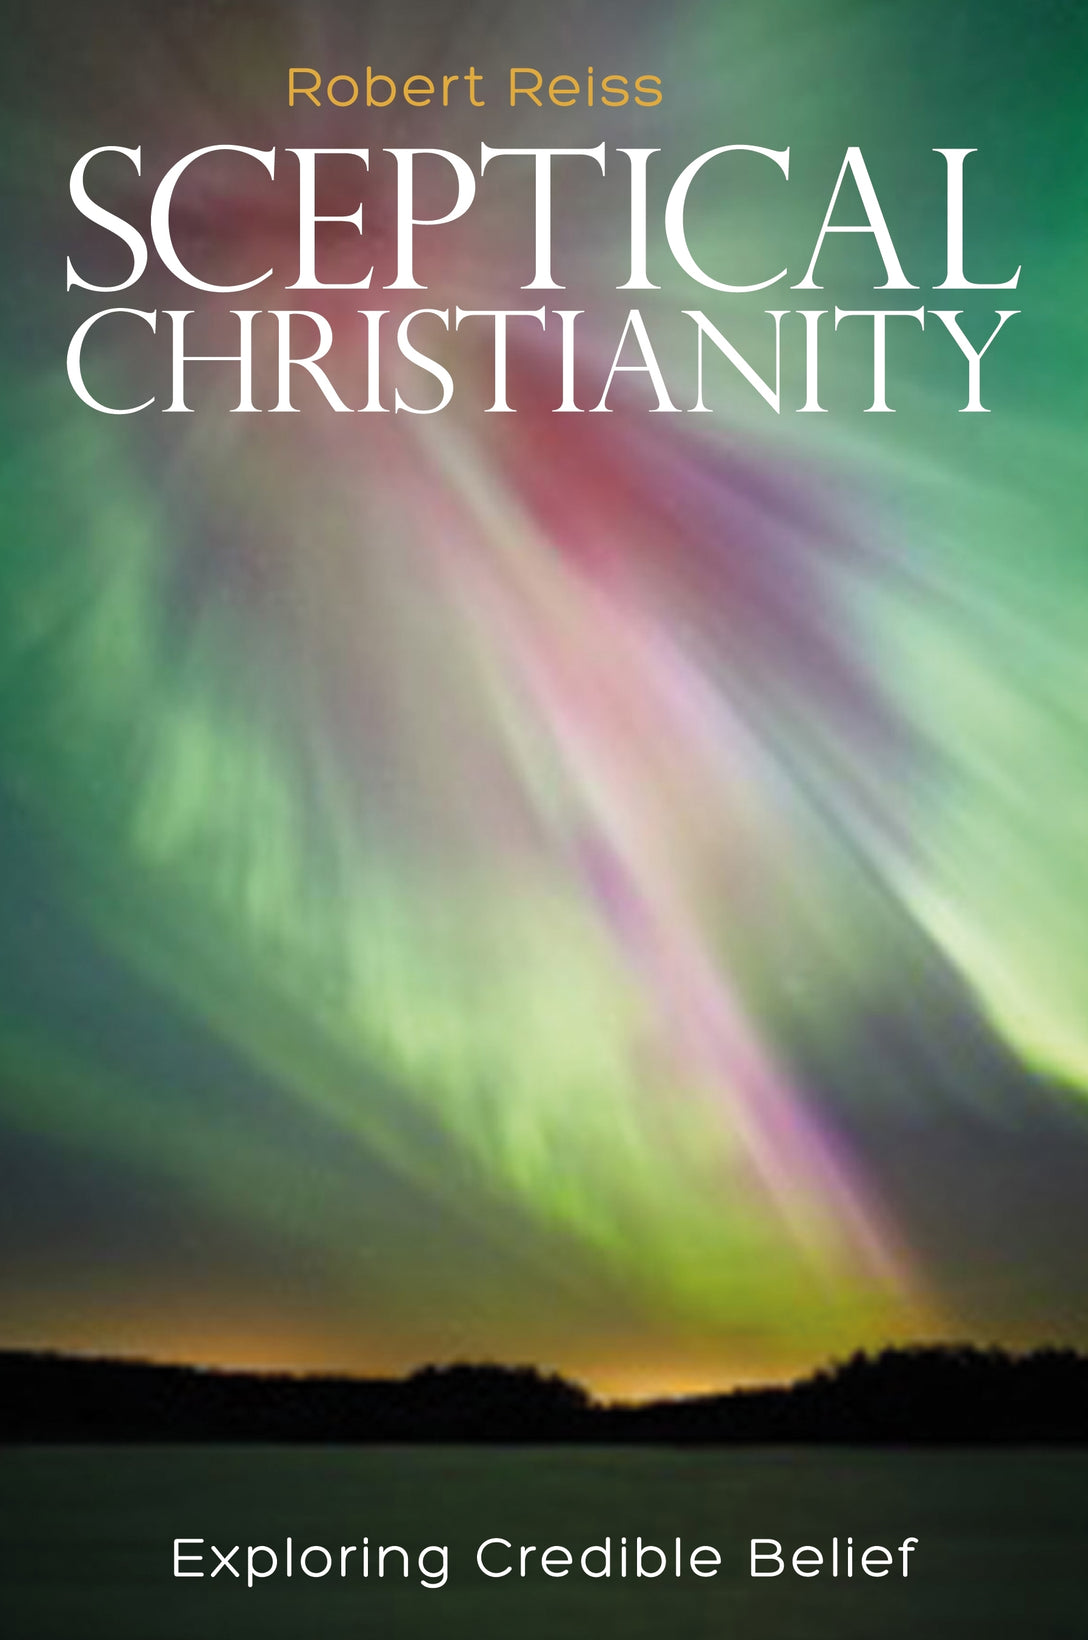 Sceptical Christianity by Robert Reiss